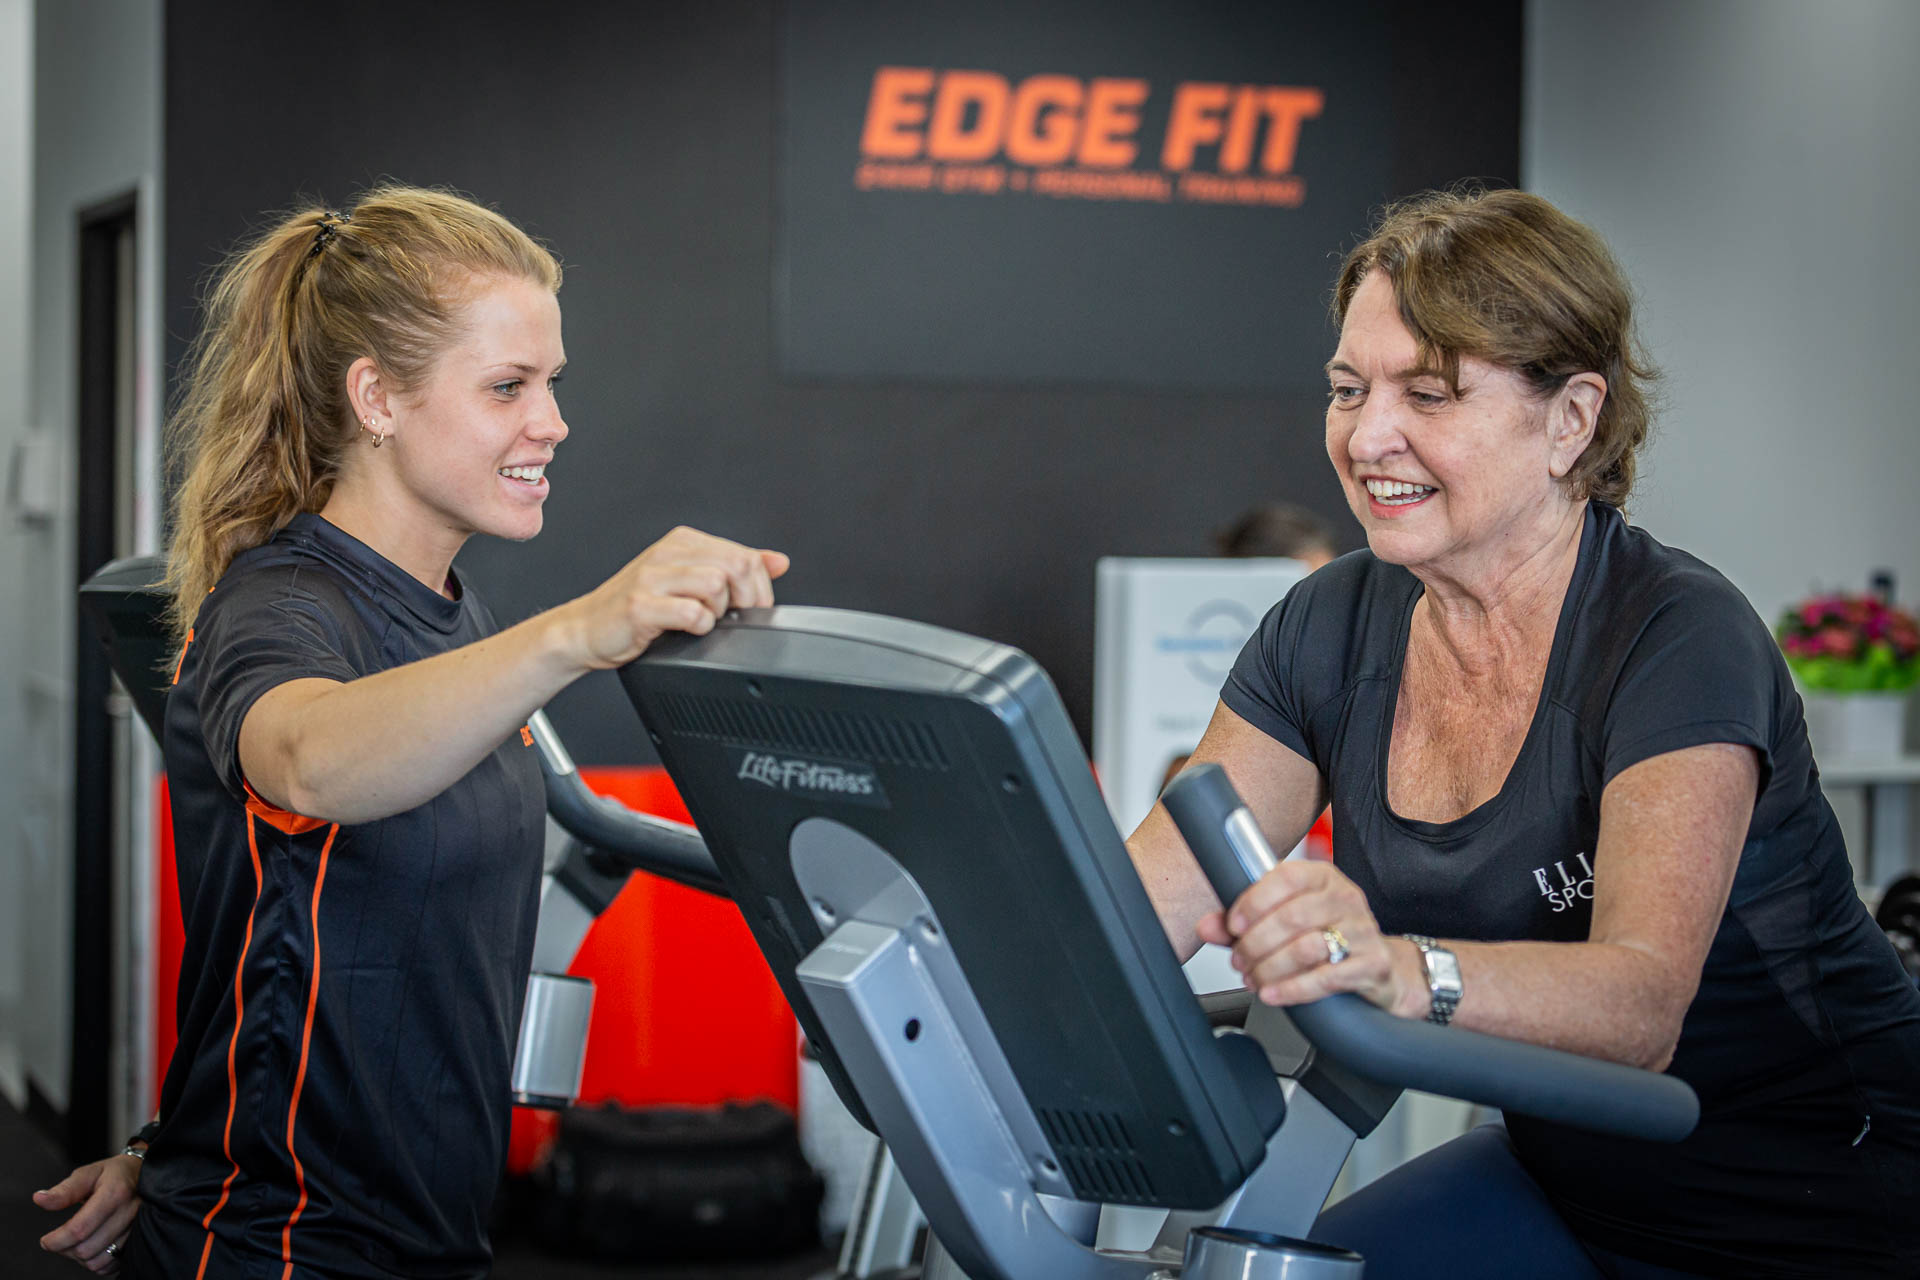 Personal Trainer - Edge Fit